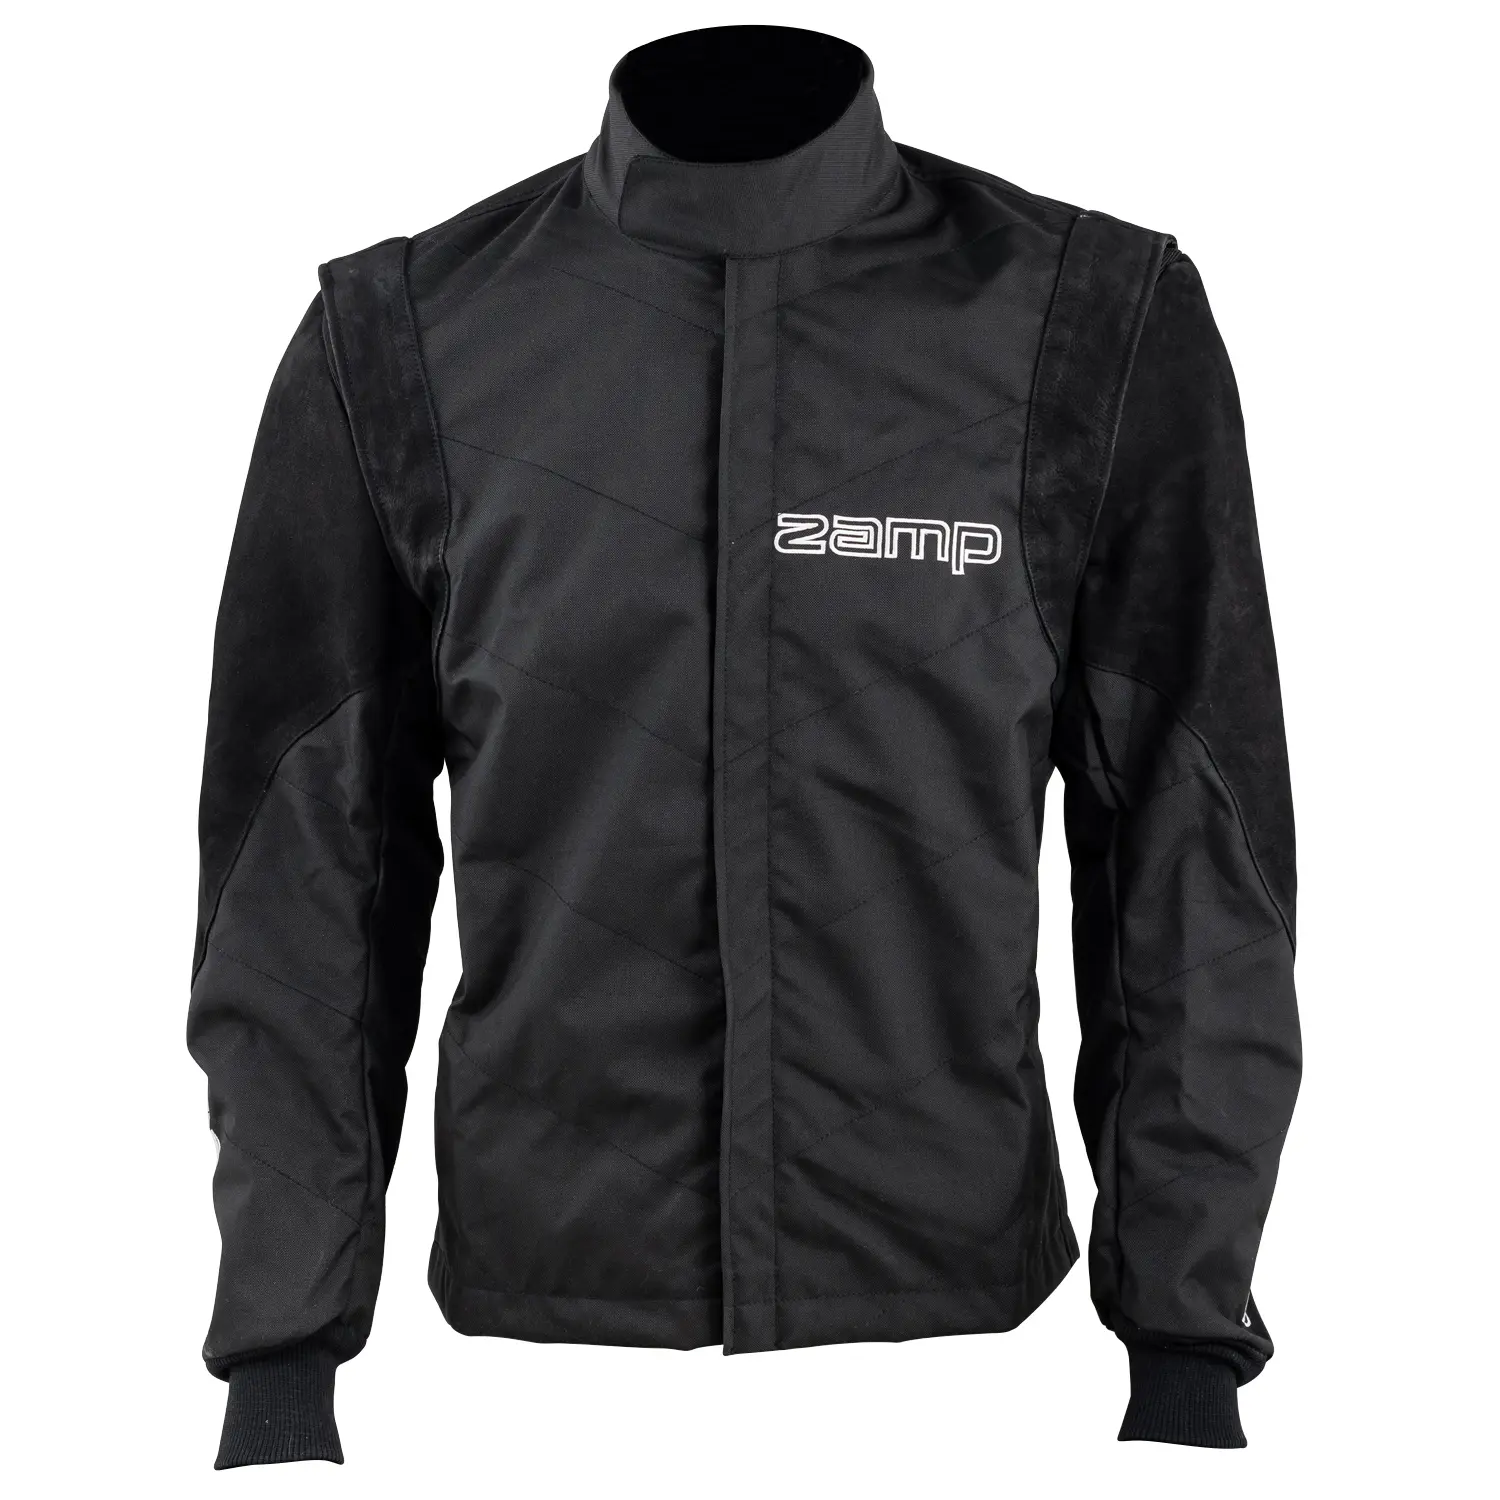 Z-25 Dirt Youth Jacket